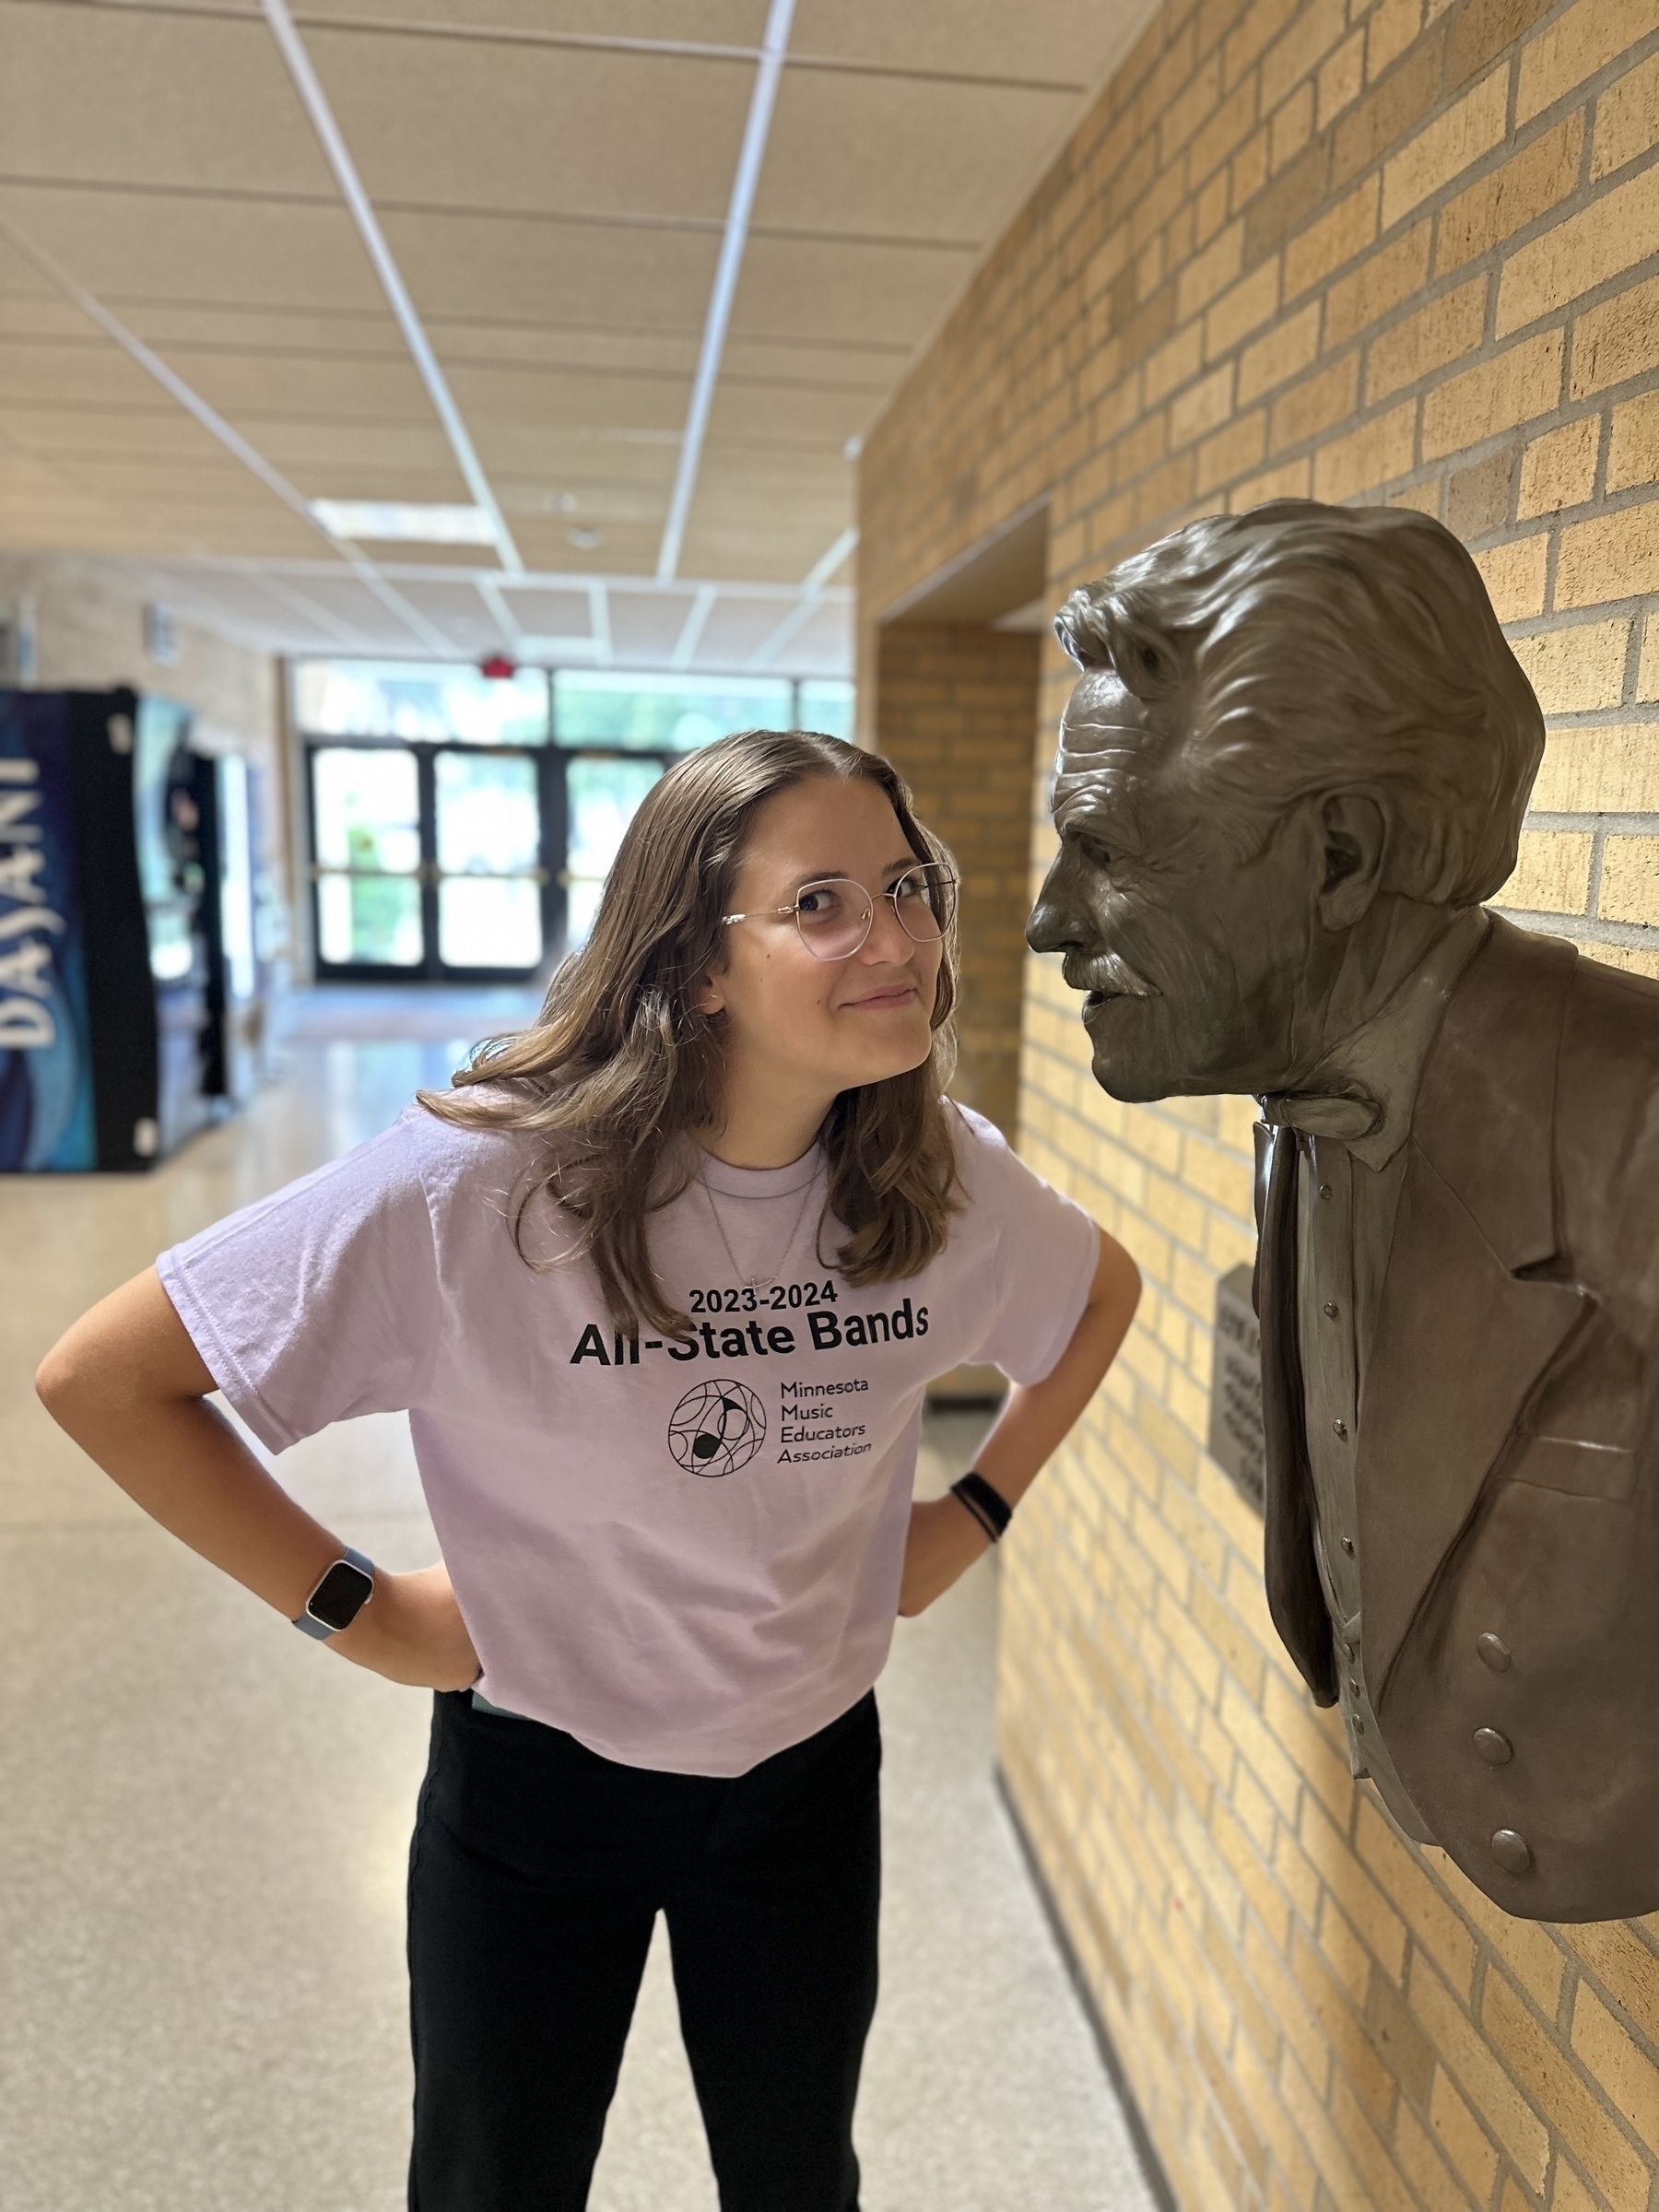 Cora eyeing a Concordia College historical figure.